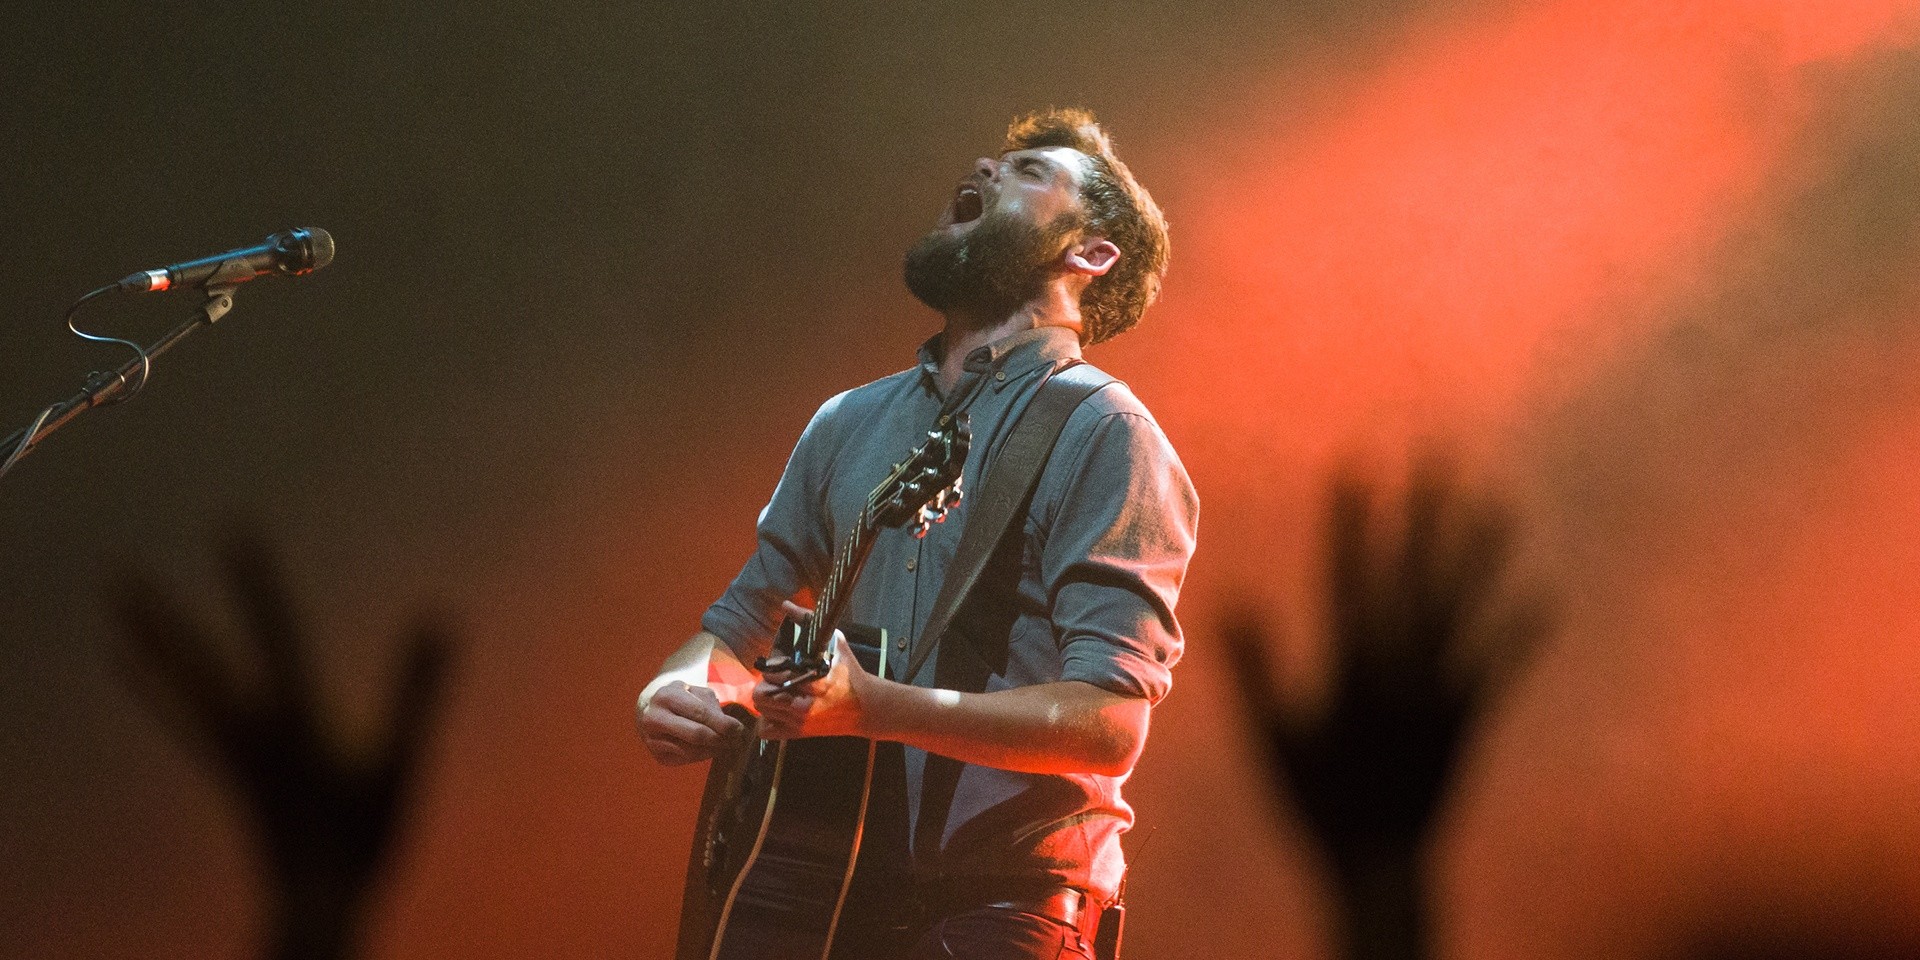 GIG REPORT: Passenger connects with Singaporean crowd through endearing, intimate stories